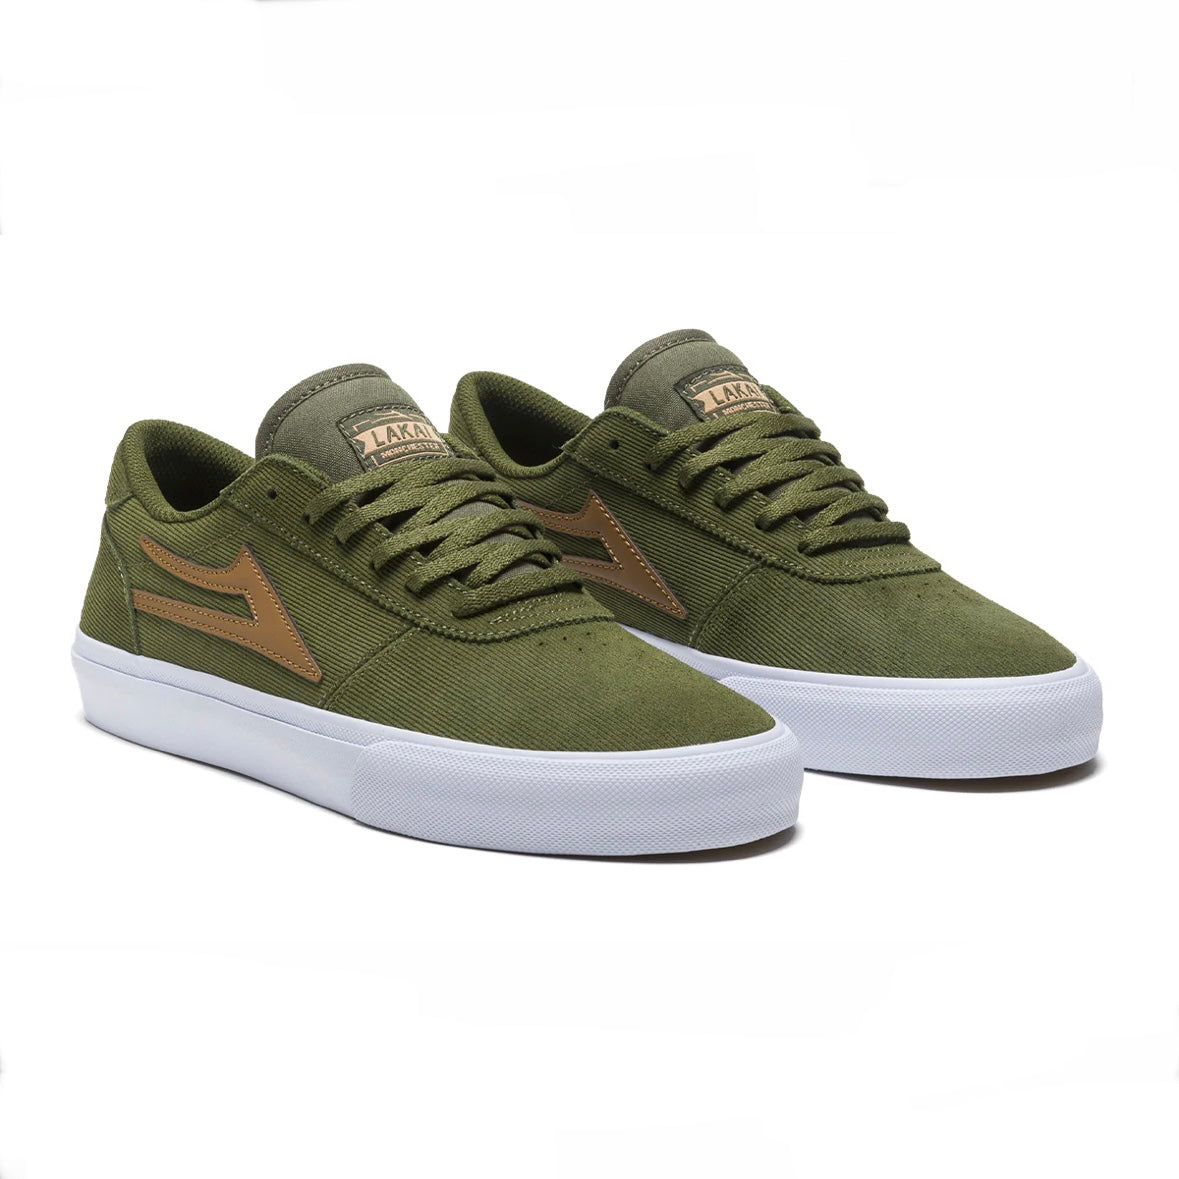 LAKAI MANCHESTER - OLIVE CORD SUEDE